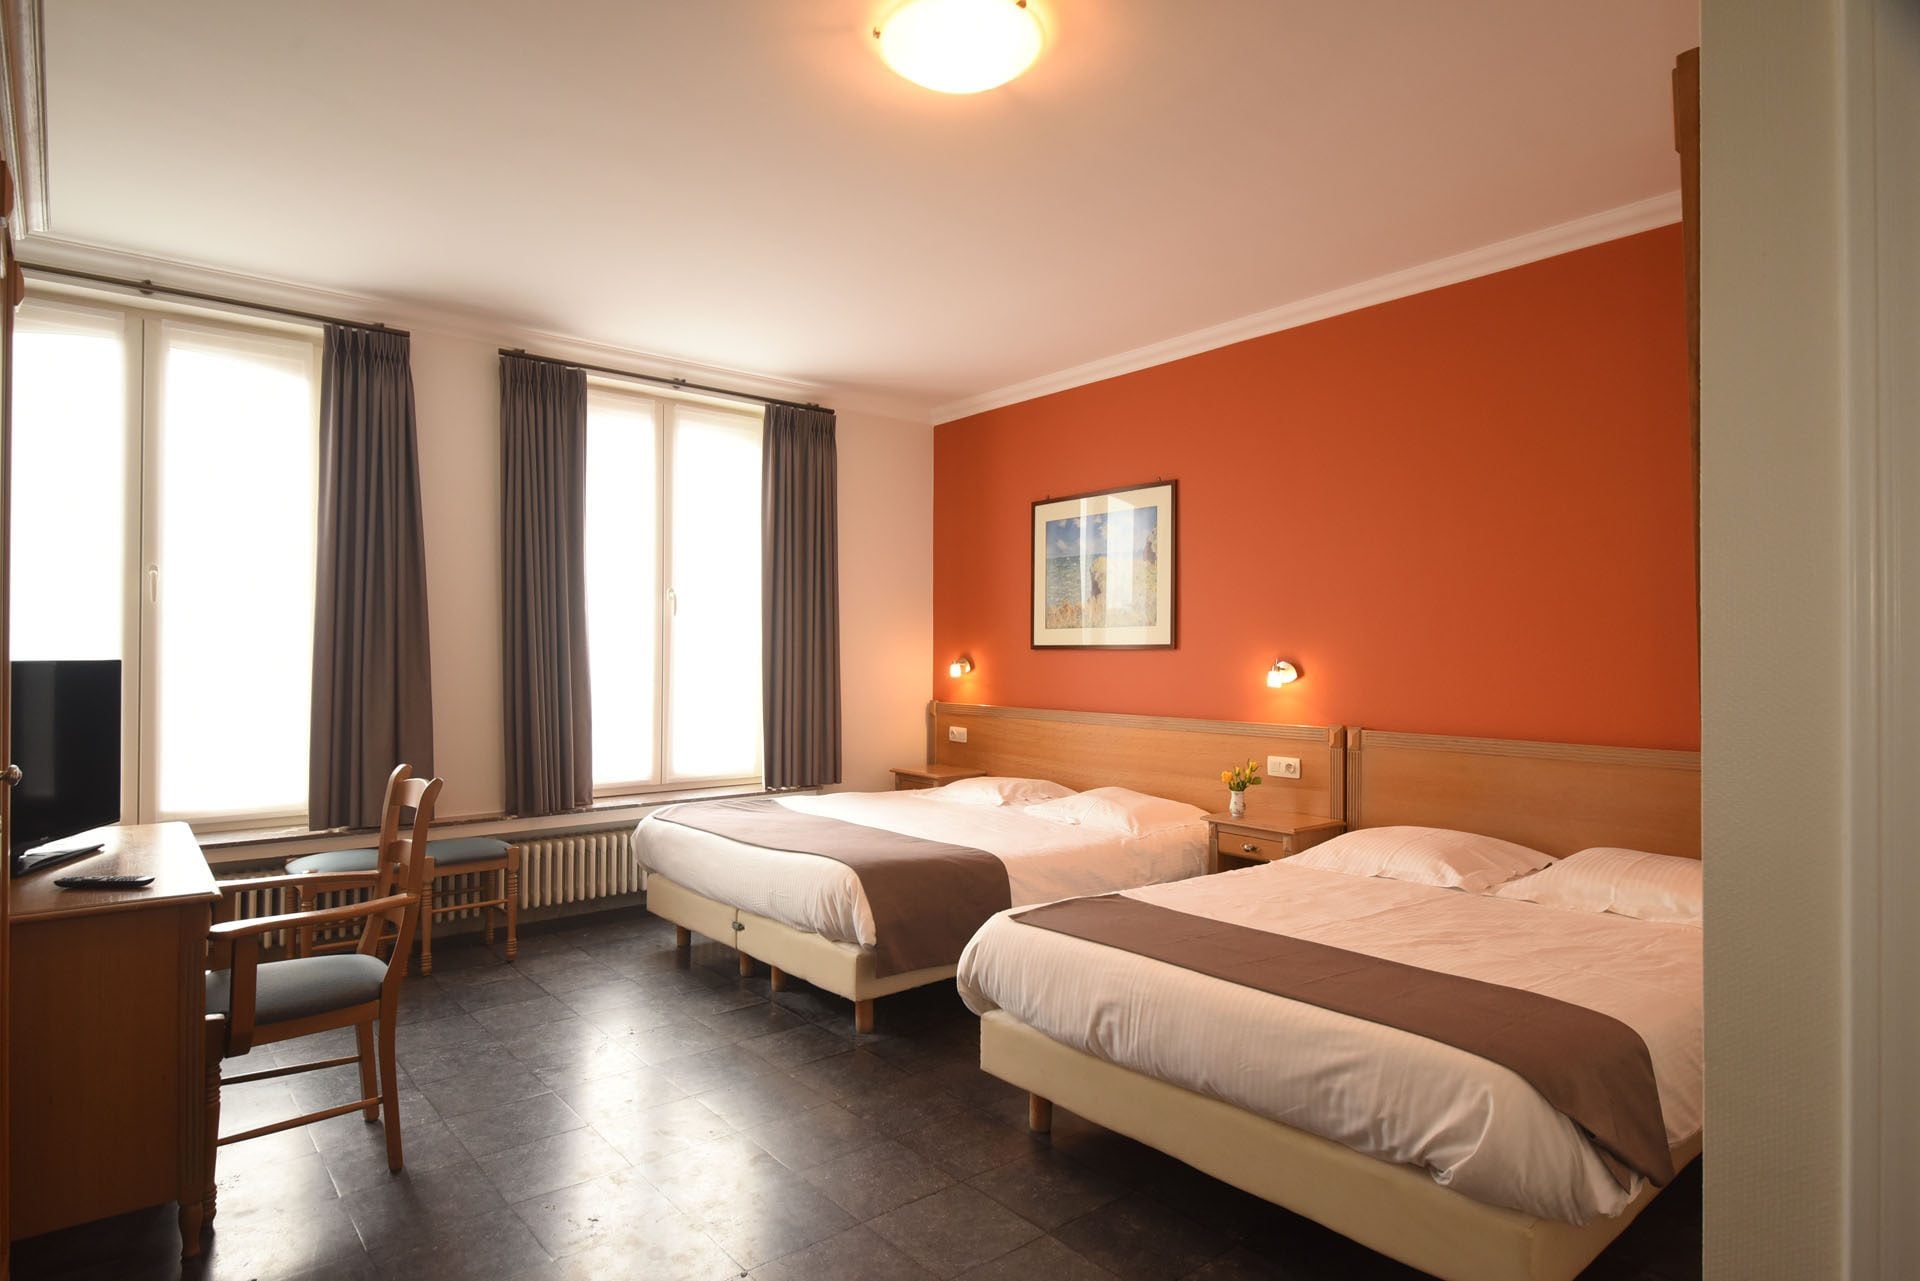 Our rooms - Sabot d'Or